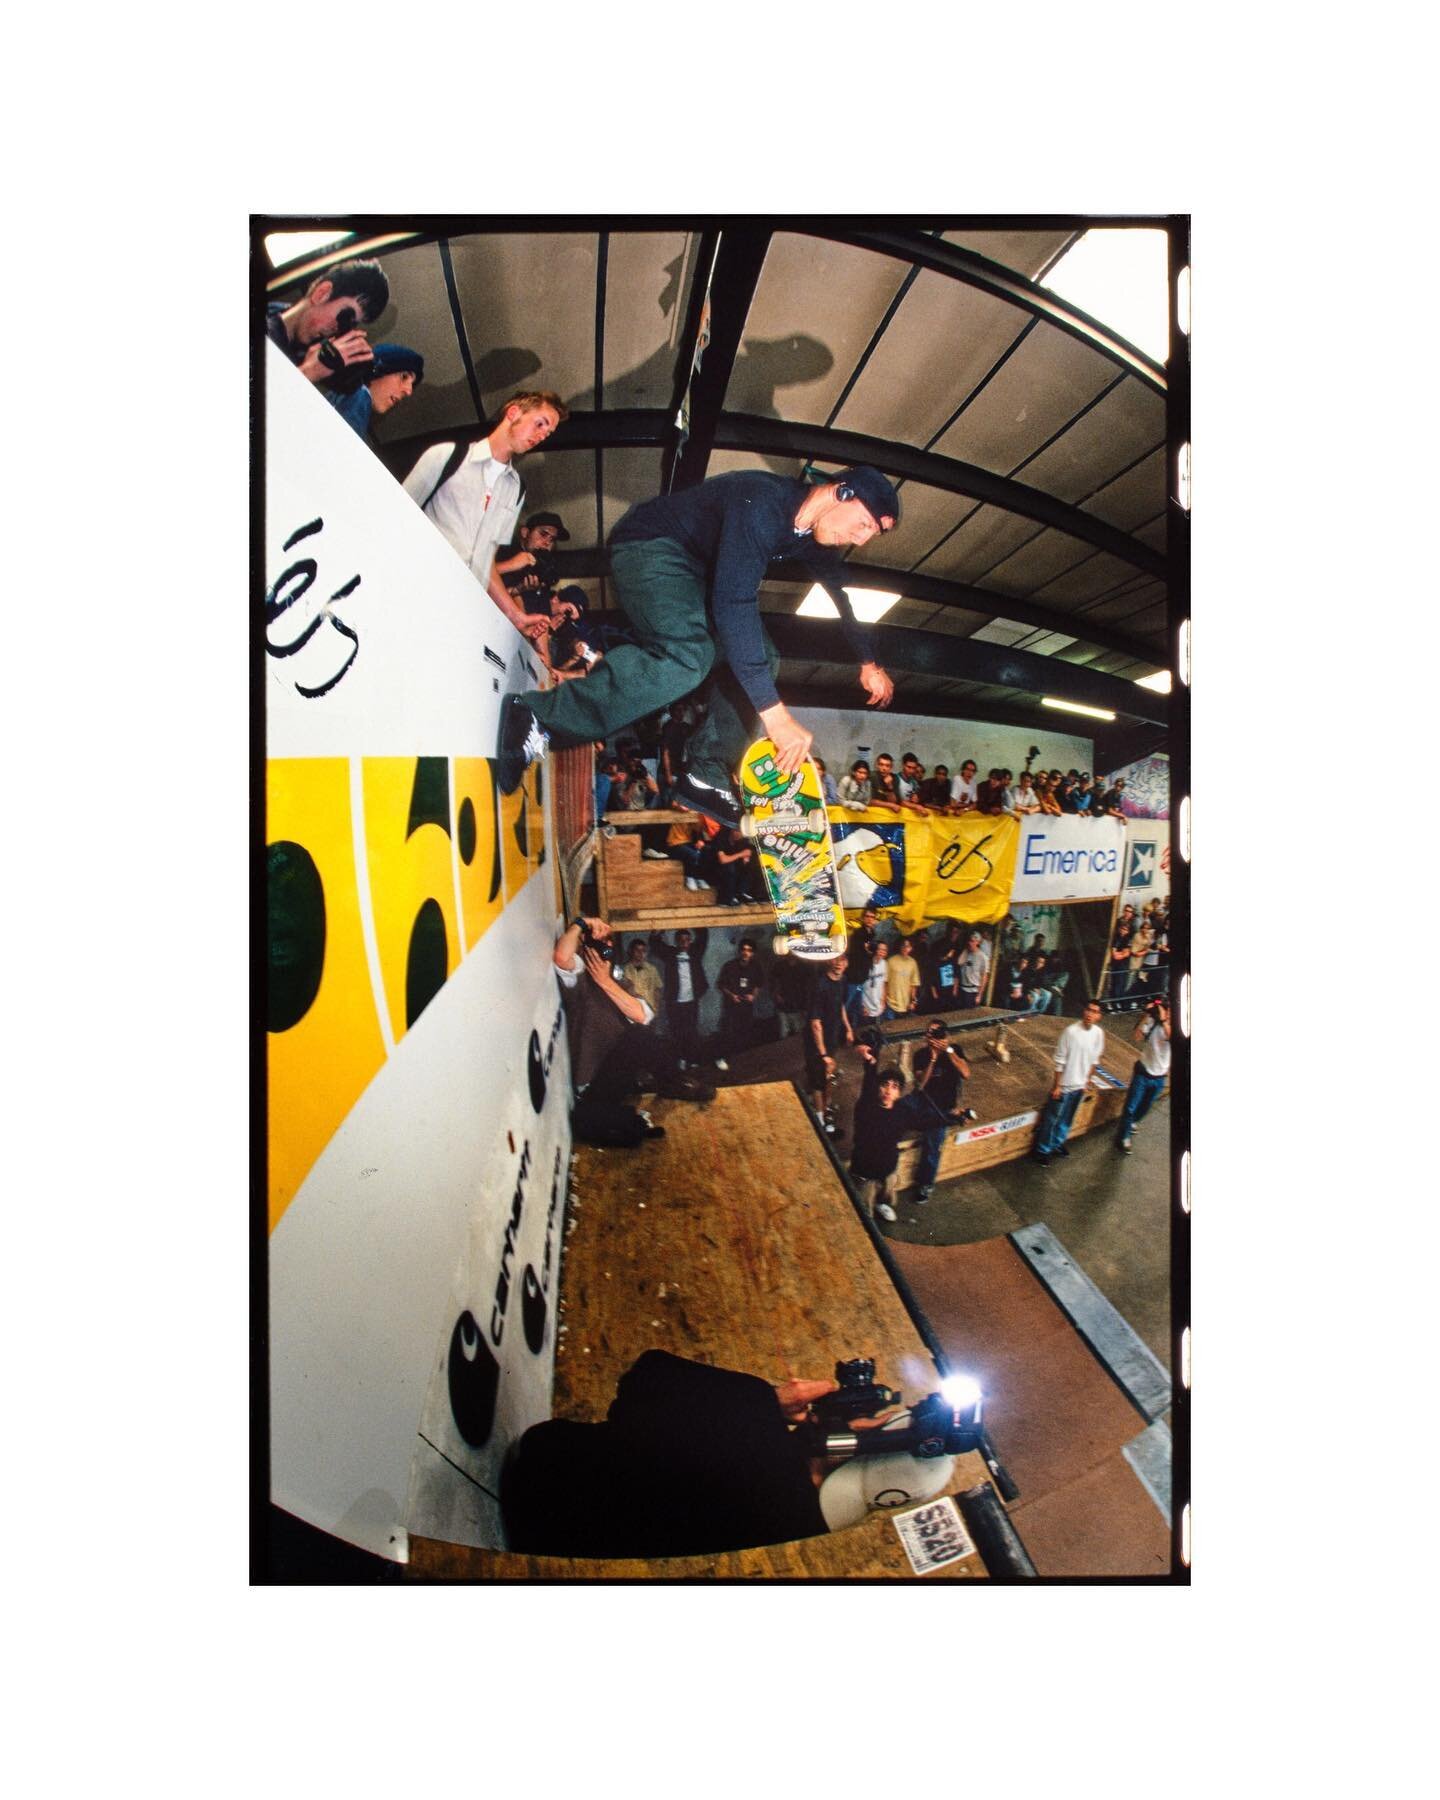 -
Donny Barley
Radlands 
1996
-
November 2022 marks 30 years since Radlands Indoor Skatepark opened in Northampton, England, UK.
-
Without overstating the point there really is no way to estimate the importance of this one particular place in UK Skat